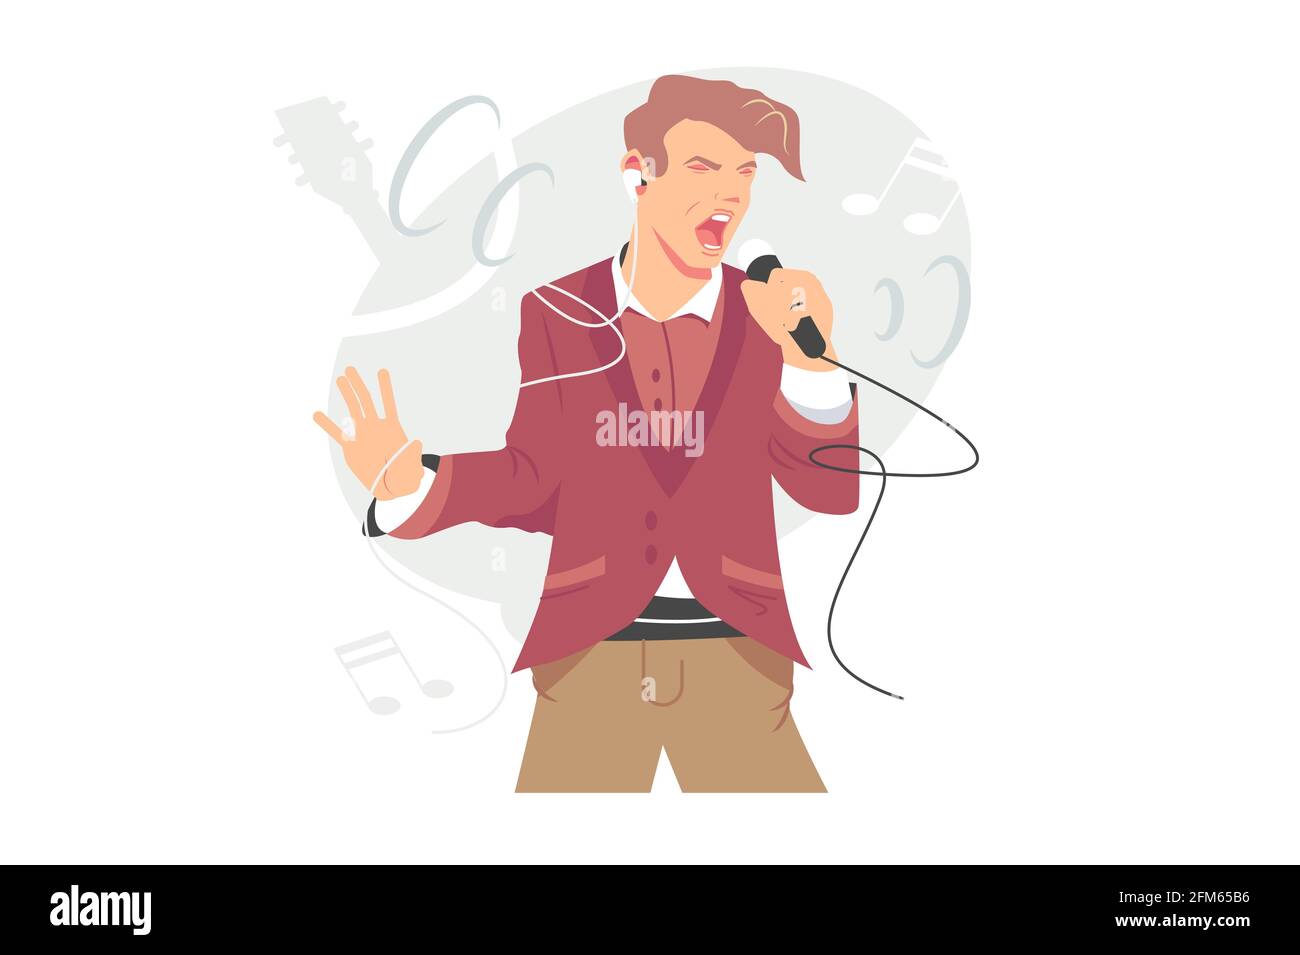 Man singing song with mic Stock Vector